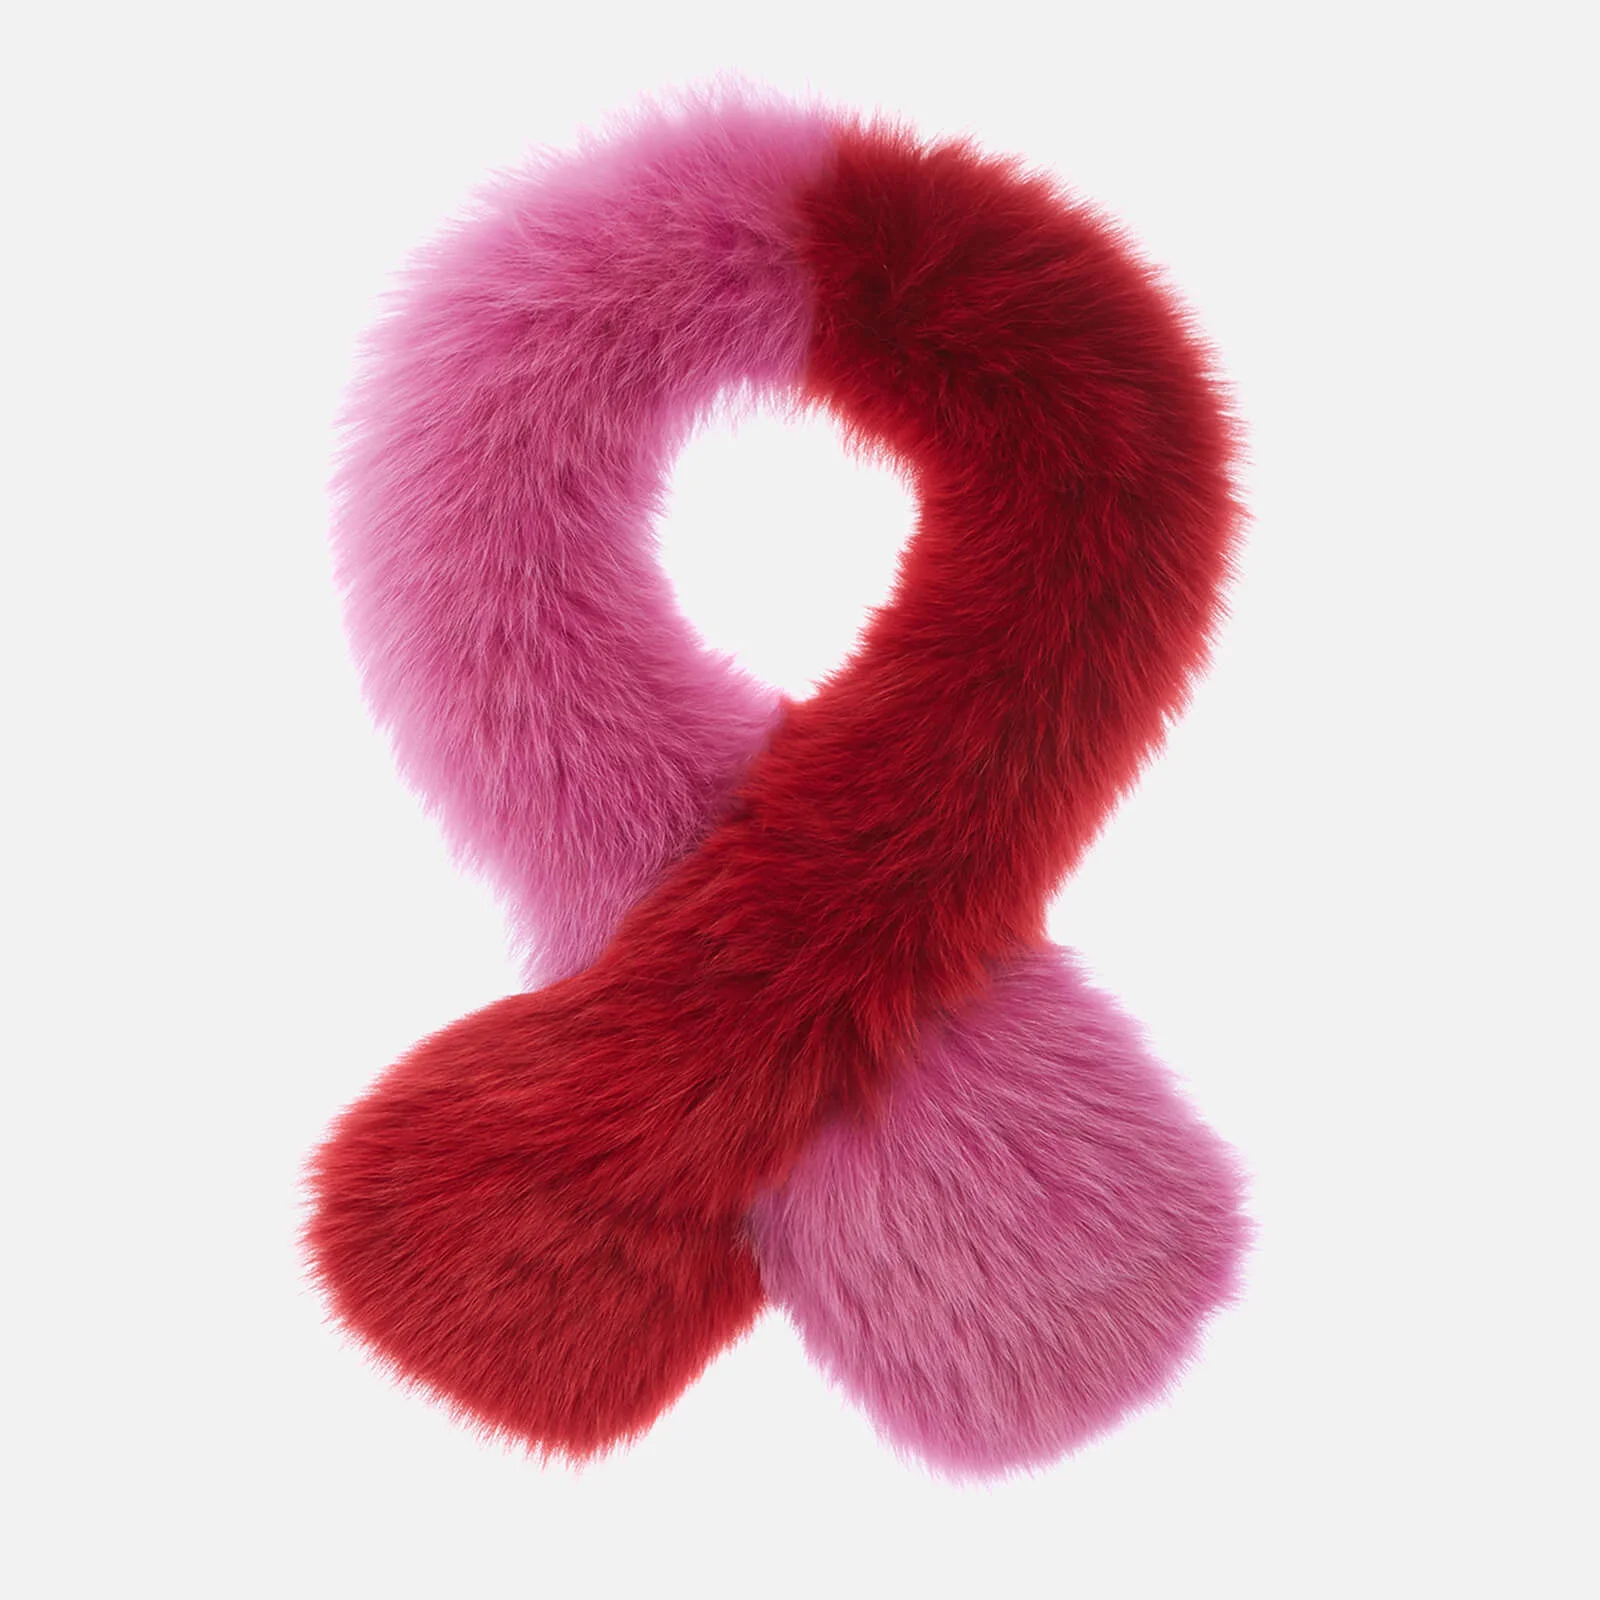 Charlotte Simone Women's Polly Pop Faux Fur Scarf - Pink/Red Image 1